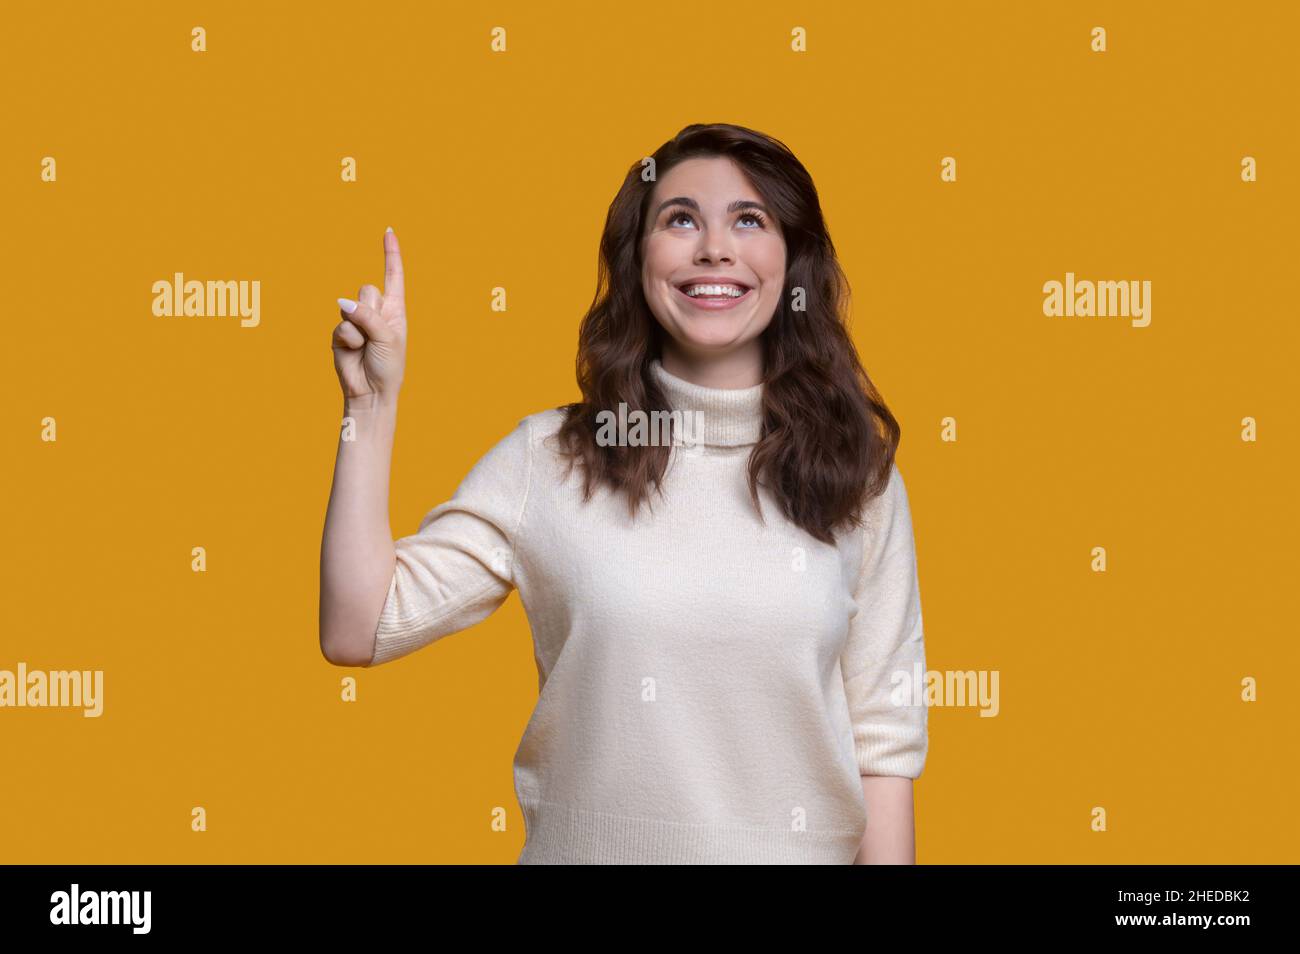 Joyous lady with the lifted forefinger looking upwards Stock Photo